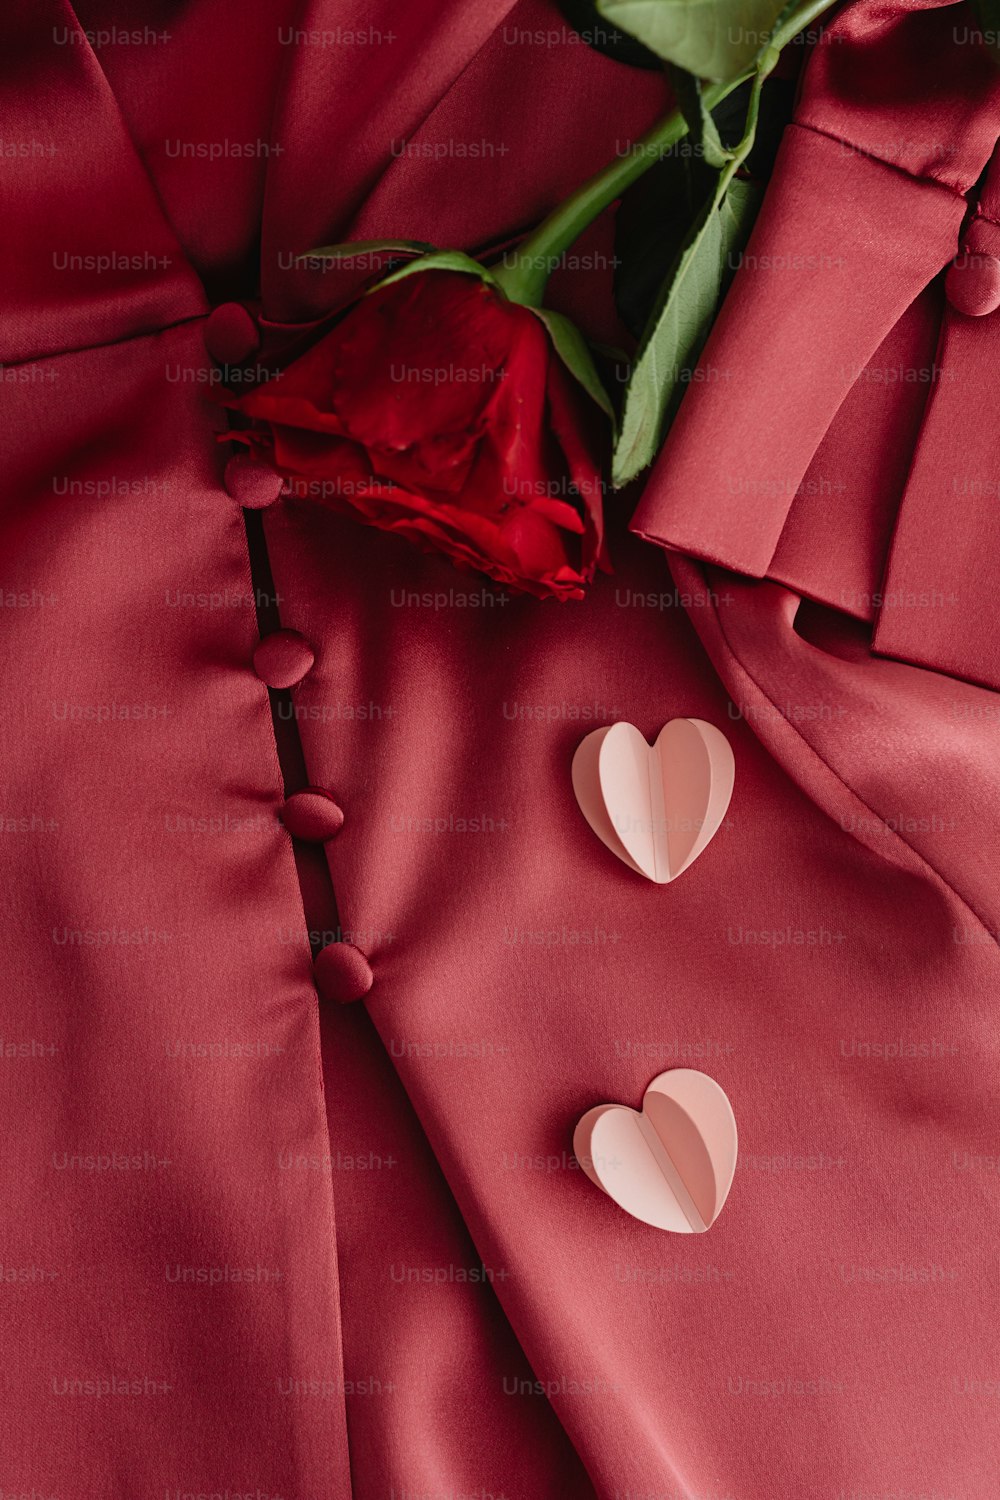 A rose and two hearts on a red satin photo – Pink love Image on Unsplash